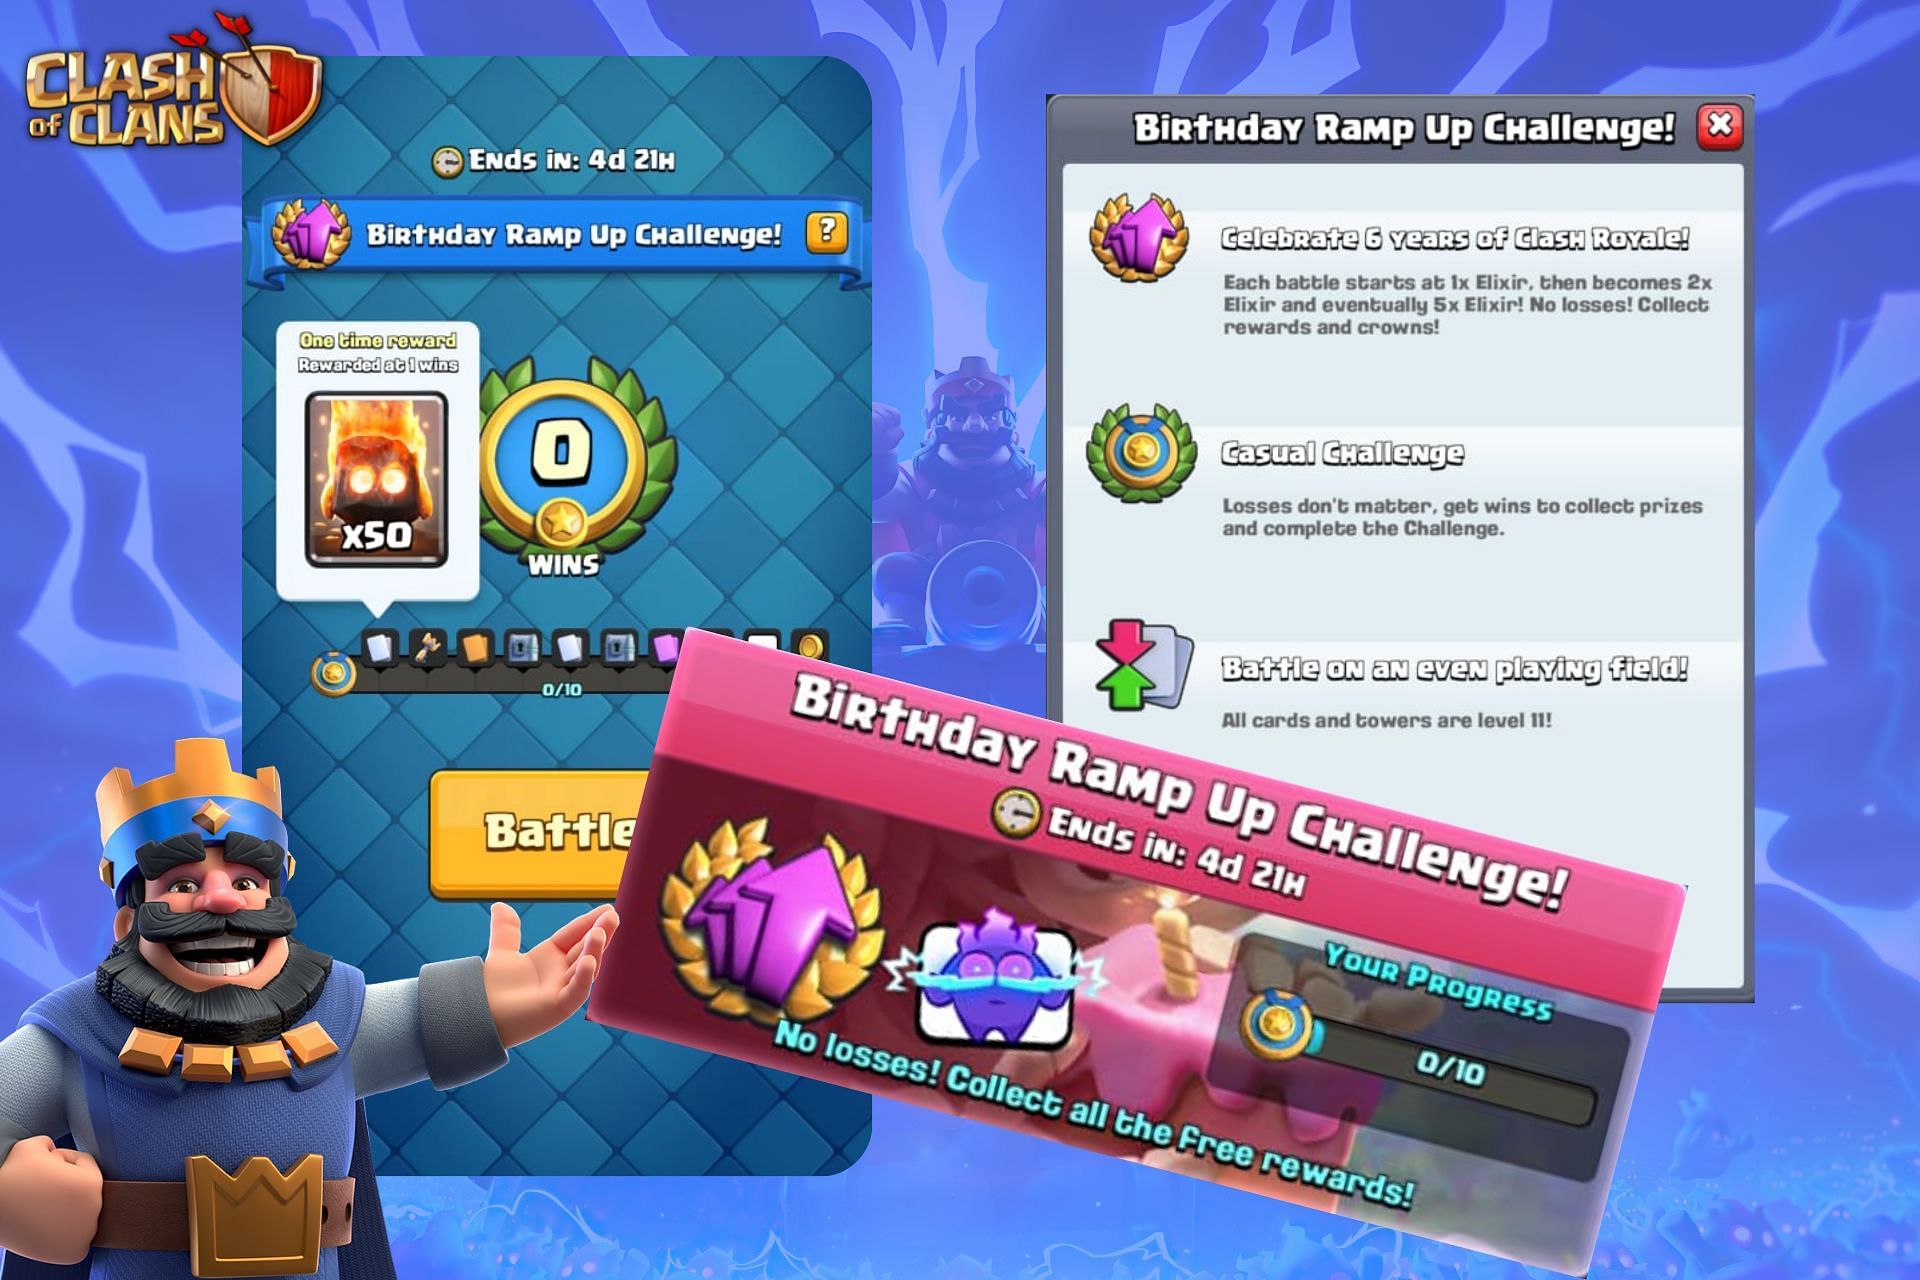 What is the Birthday Ramp Up Challenge in Clash Royale?